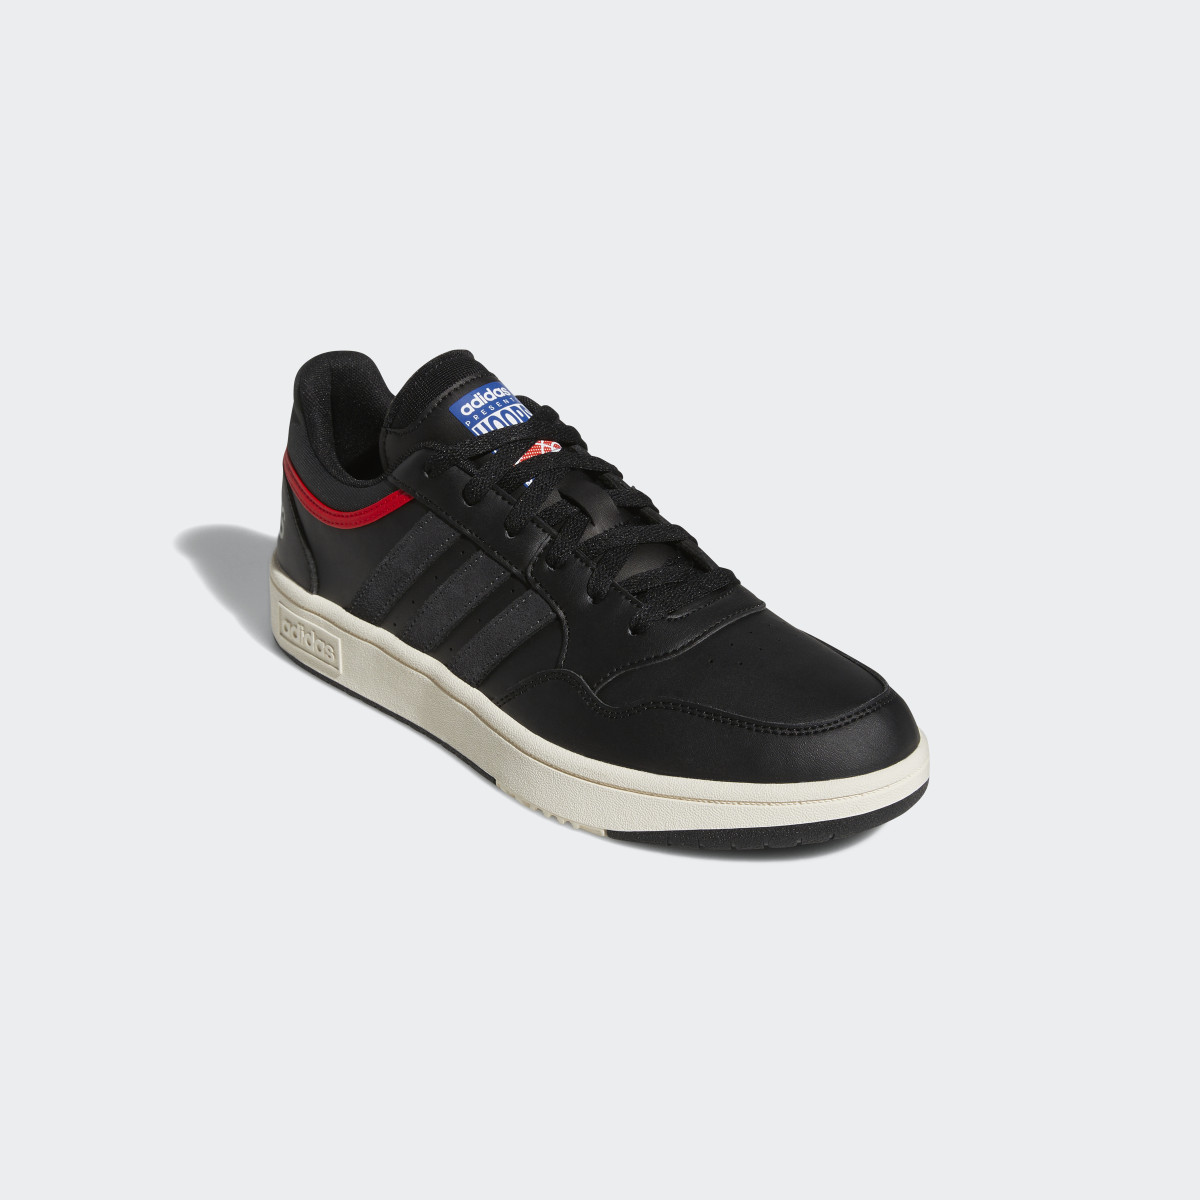 Adidas Hoops 3.0 Low Classic Vintage Shoes. 5